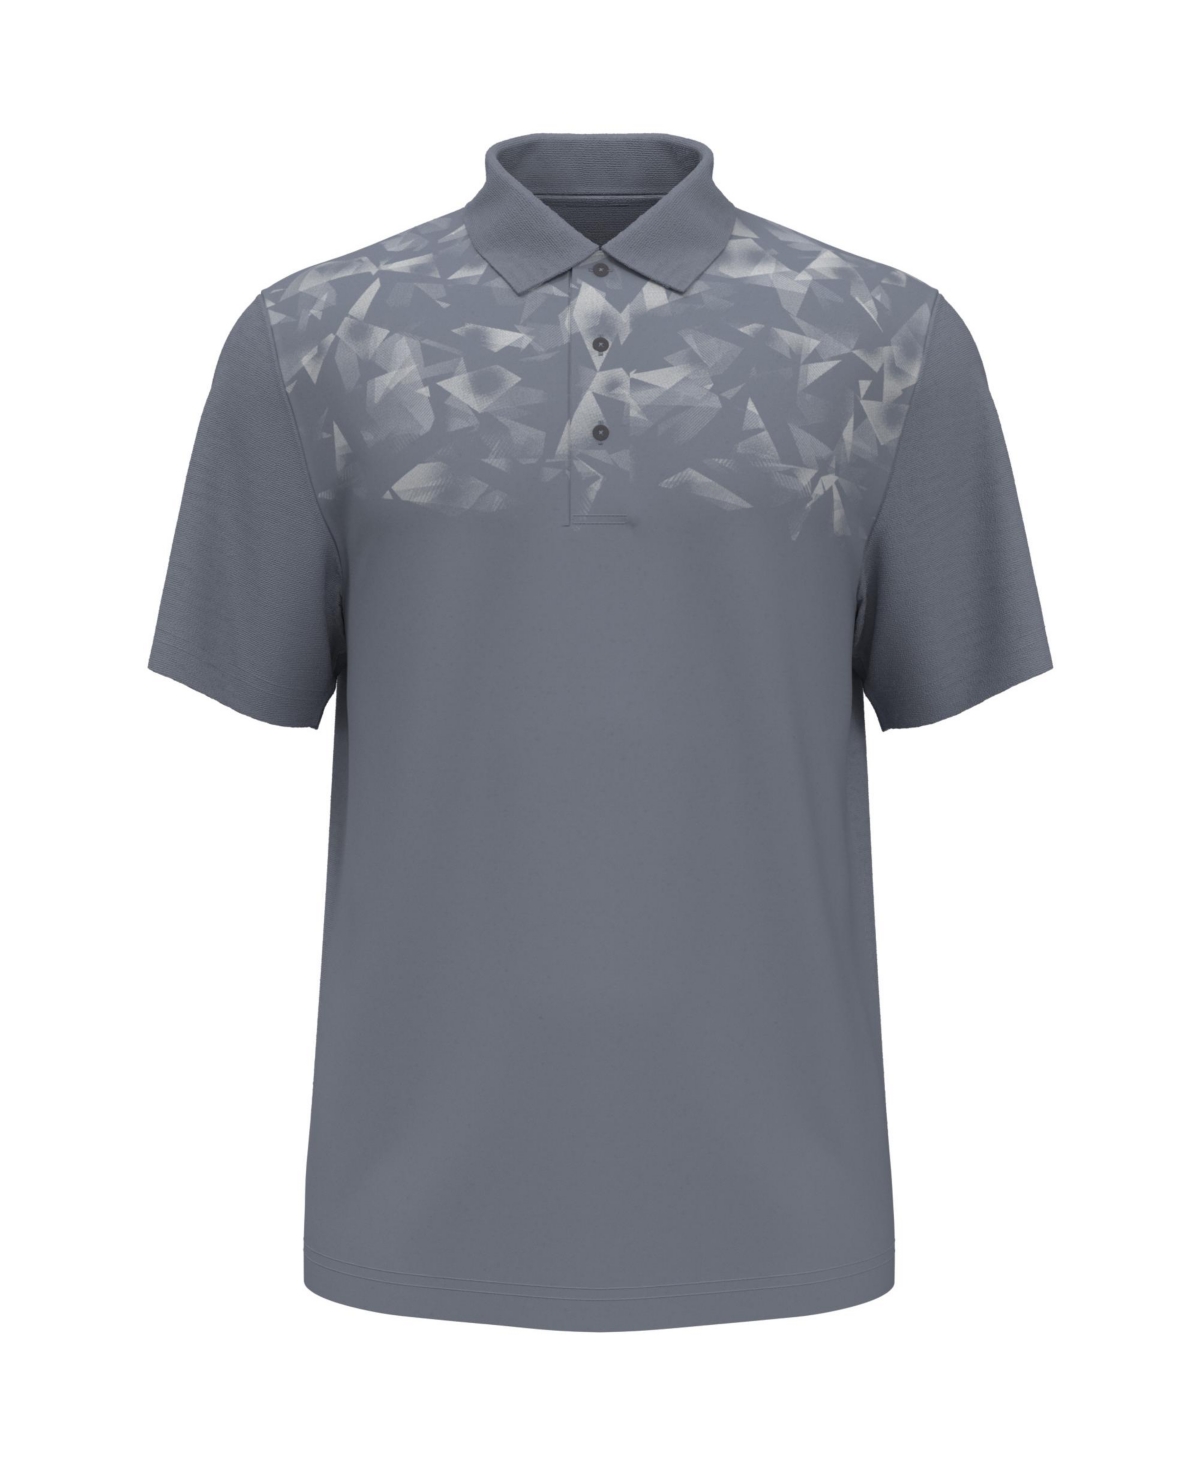 Pga Tour Kids' Big Boys Short Sleeve Abstract Ombre Geo Print Polo Shirt In Trade Winds